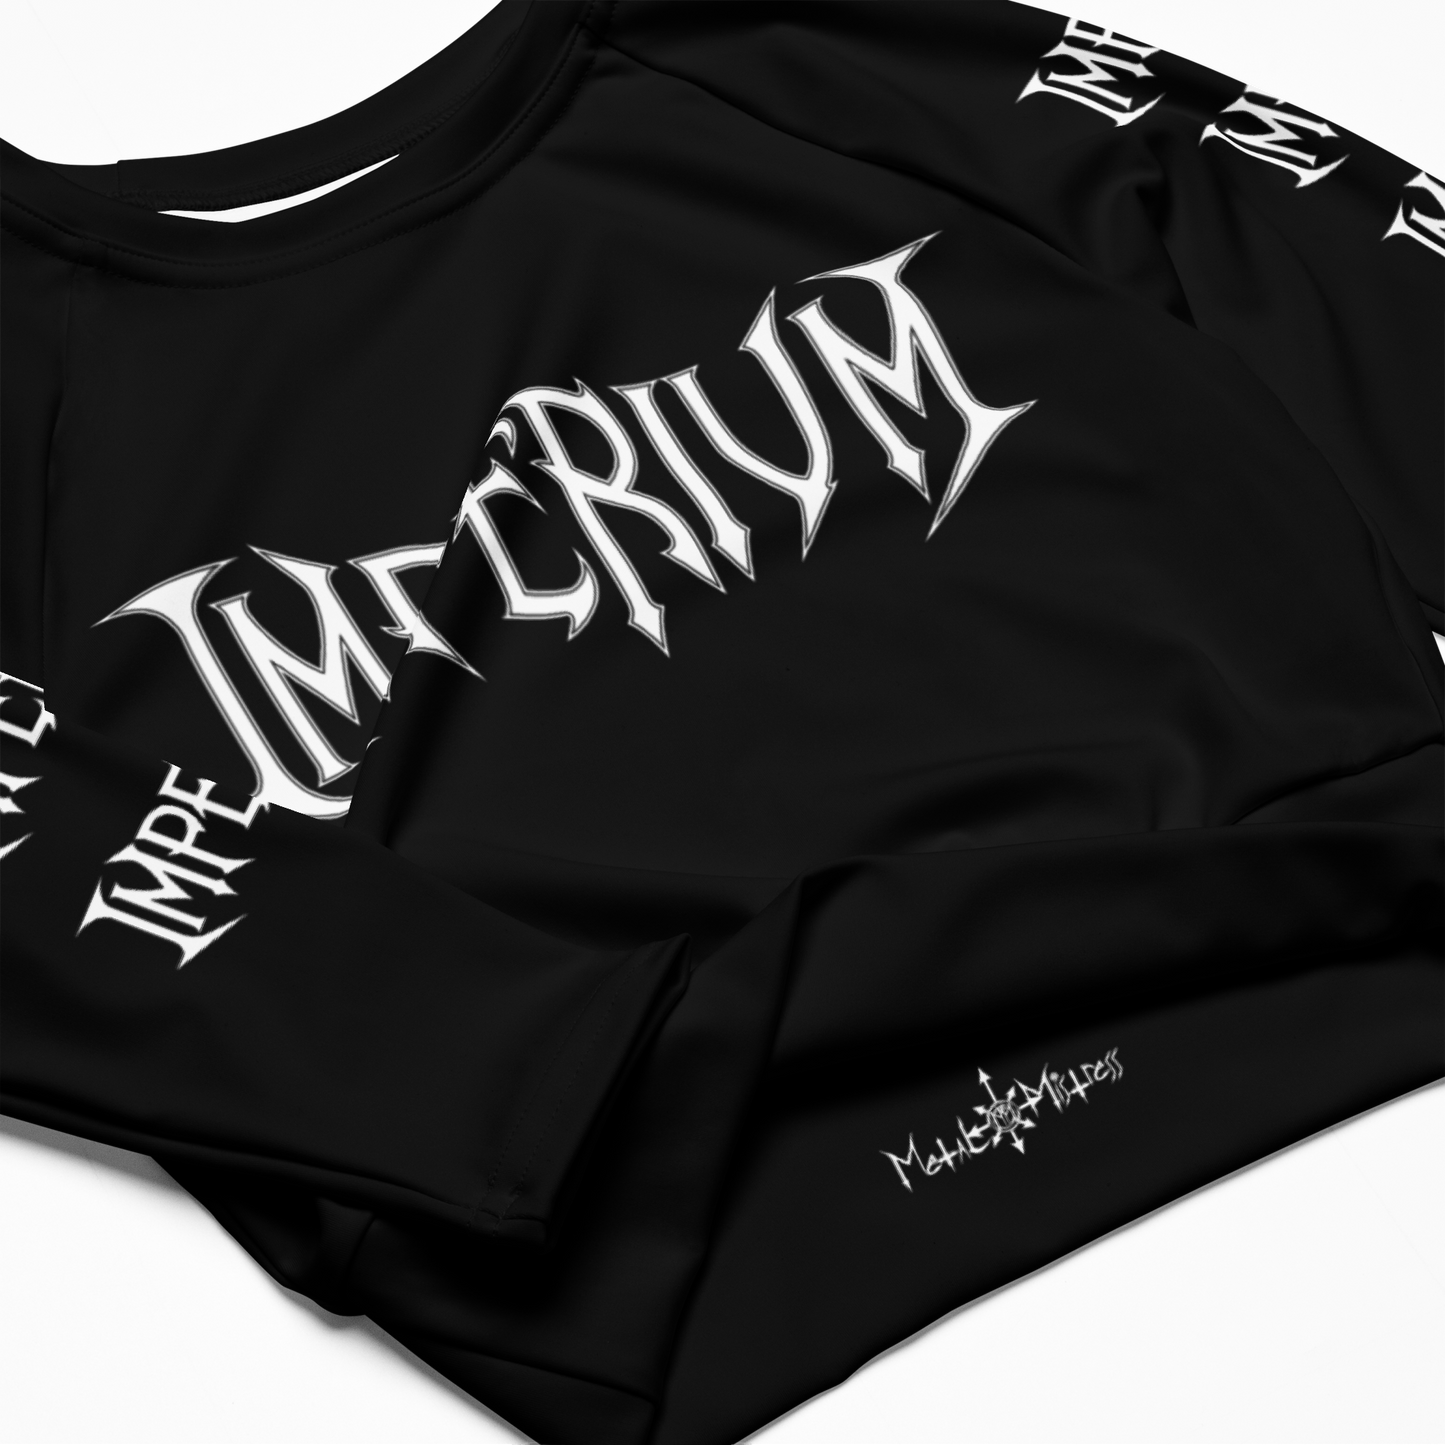 Imperium White Logo official long sleeve crop top by Metal Mistress